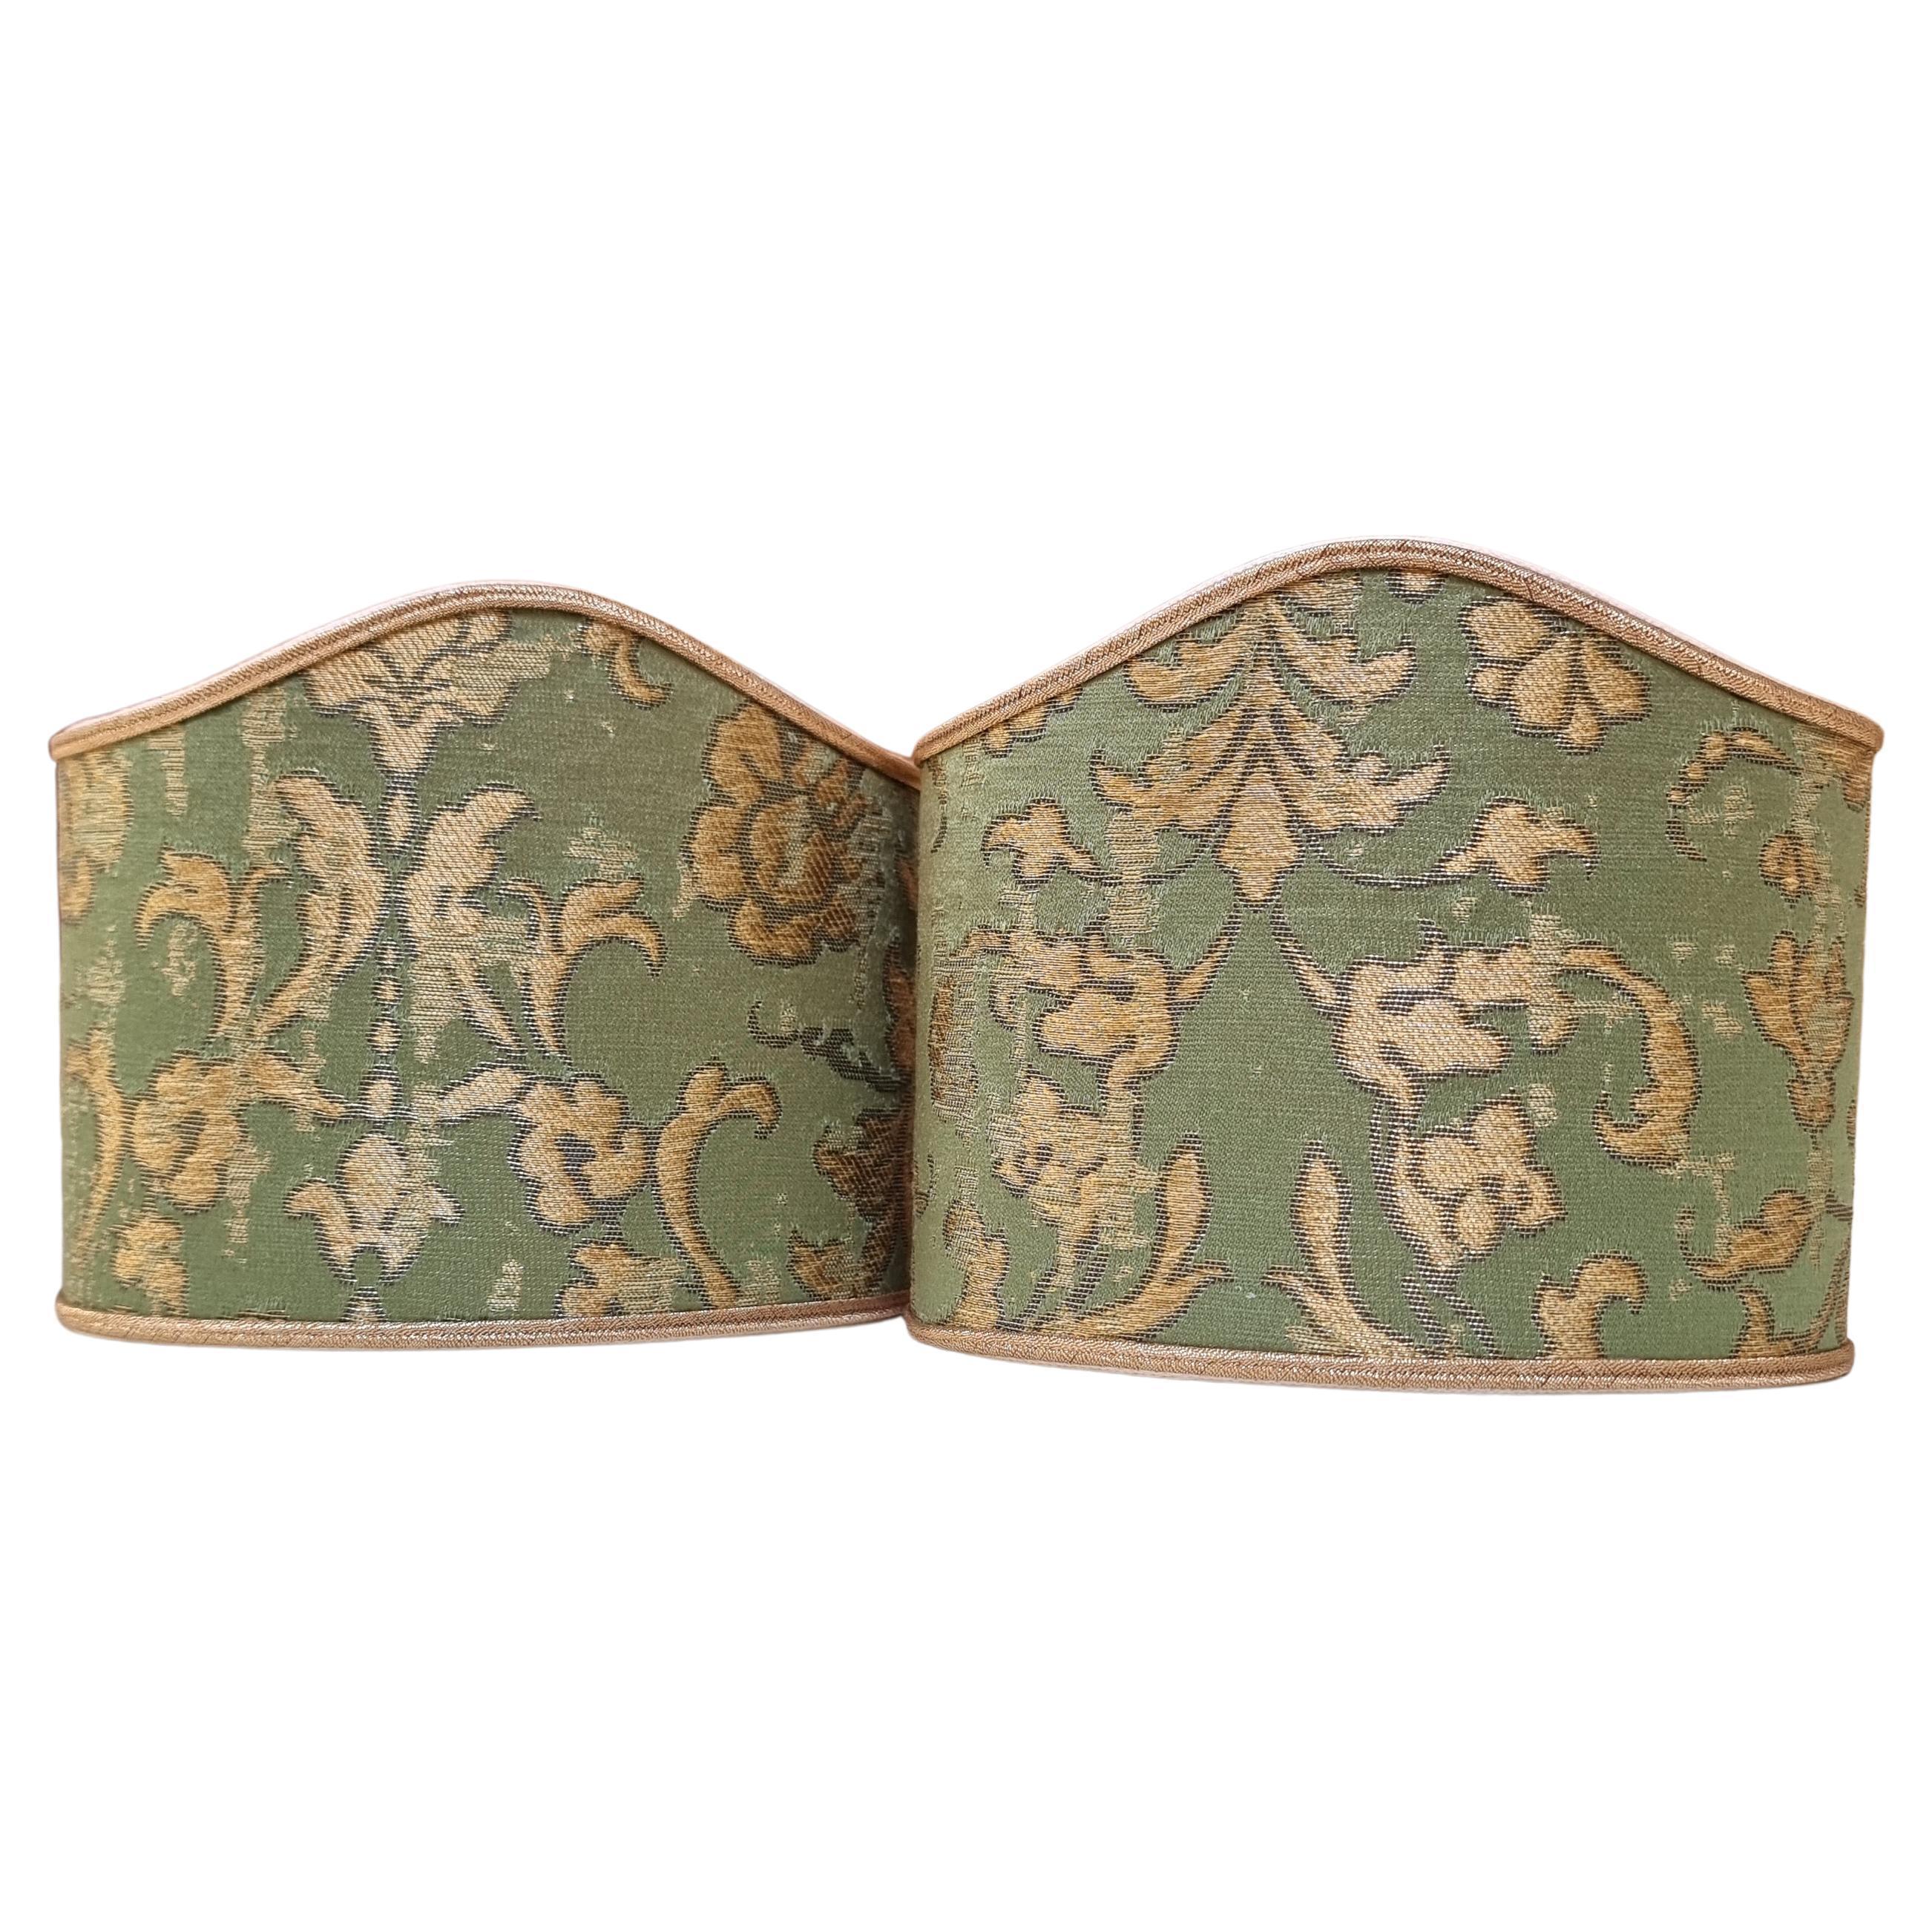 This pretty set of 2 clip on wall sconce lampshades with a fitting that clips over the light bulb is handmade using Rubelli silk jacquard fabric - Les Indes Galantes pattern - in jade green and gold color, finished with gold trim. Suitable for